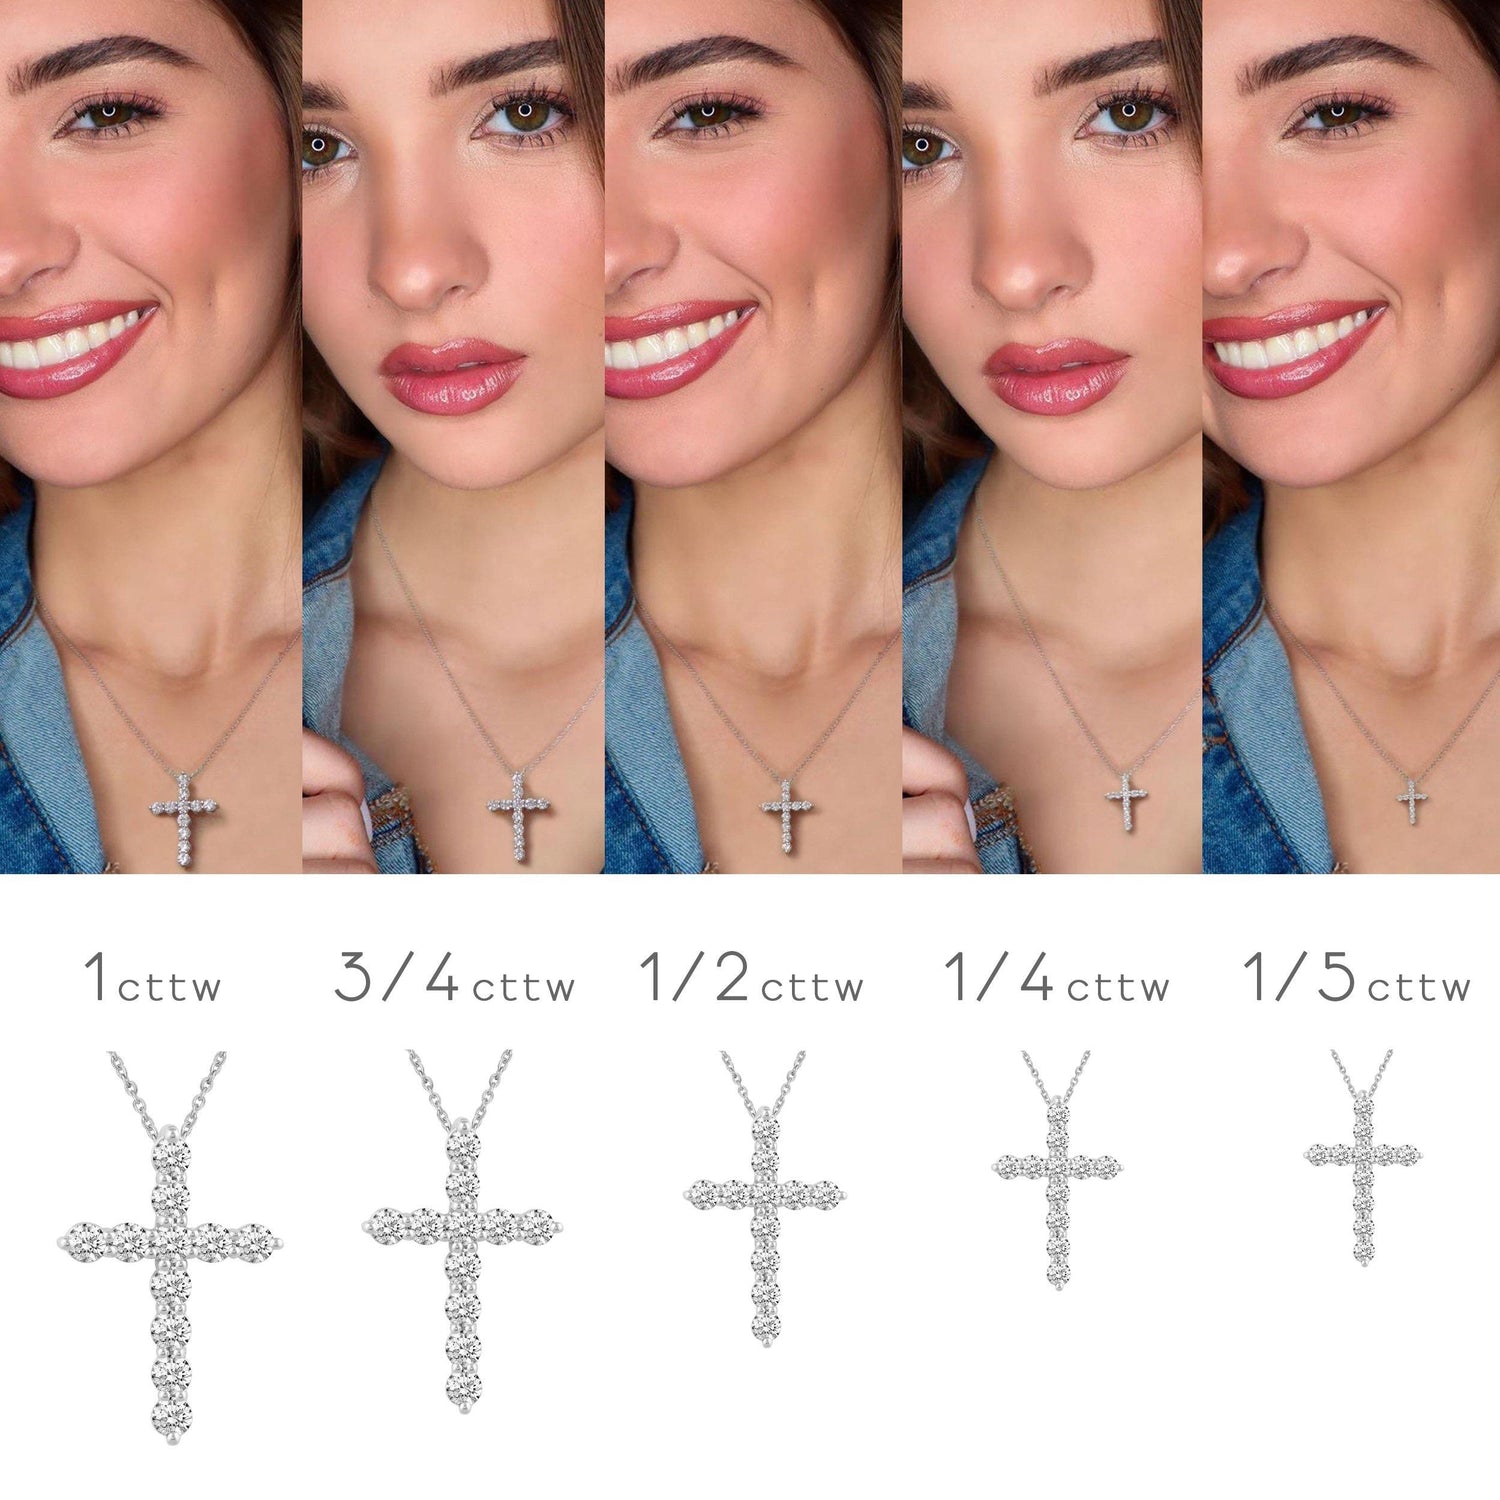 cross pendant necklace natural diamond affordable gift birthday anniversary